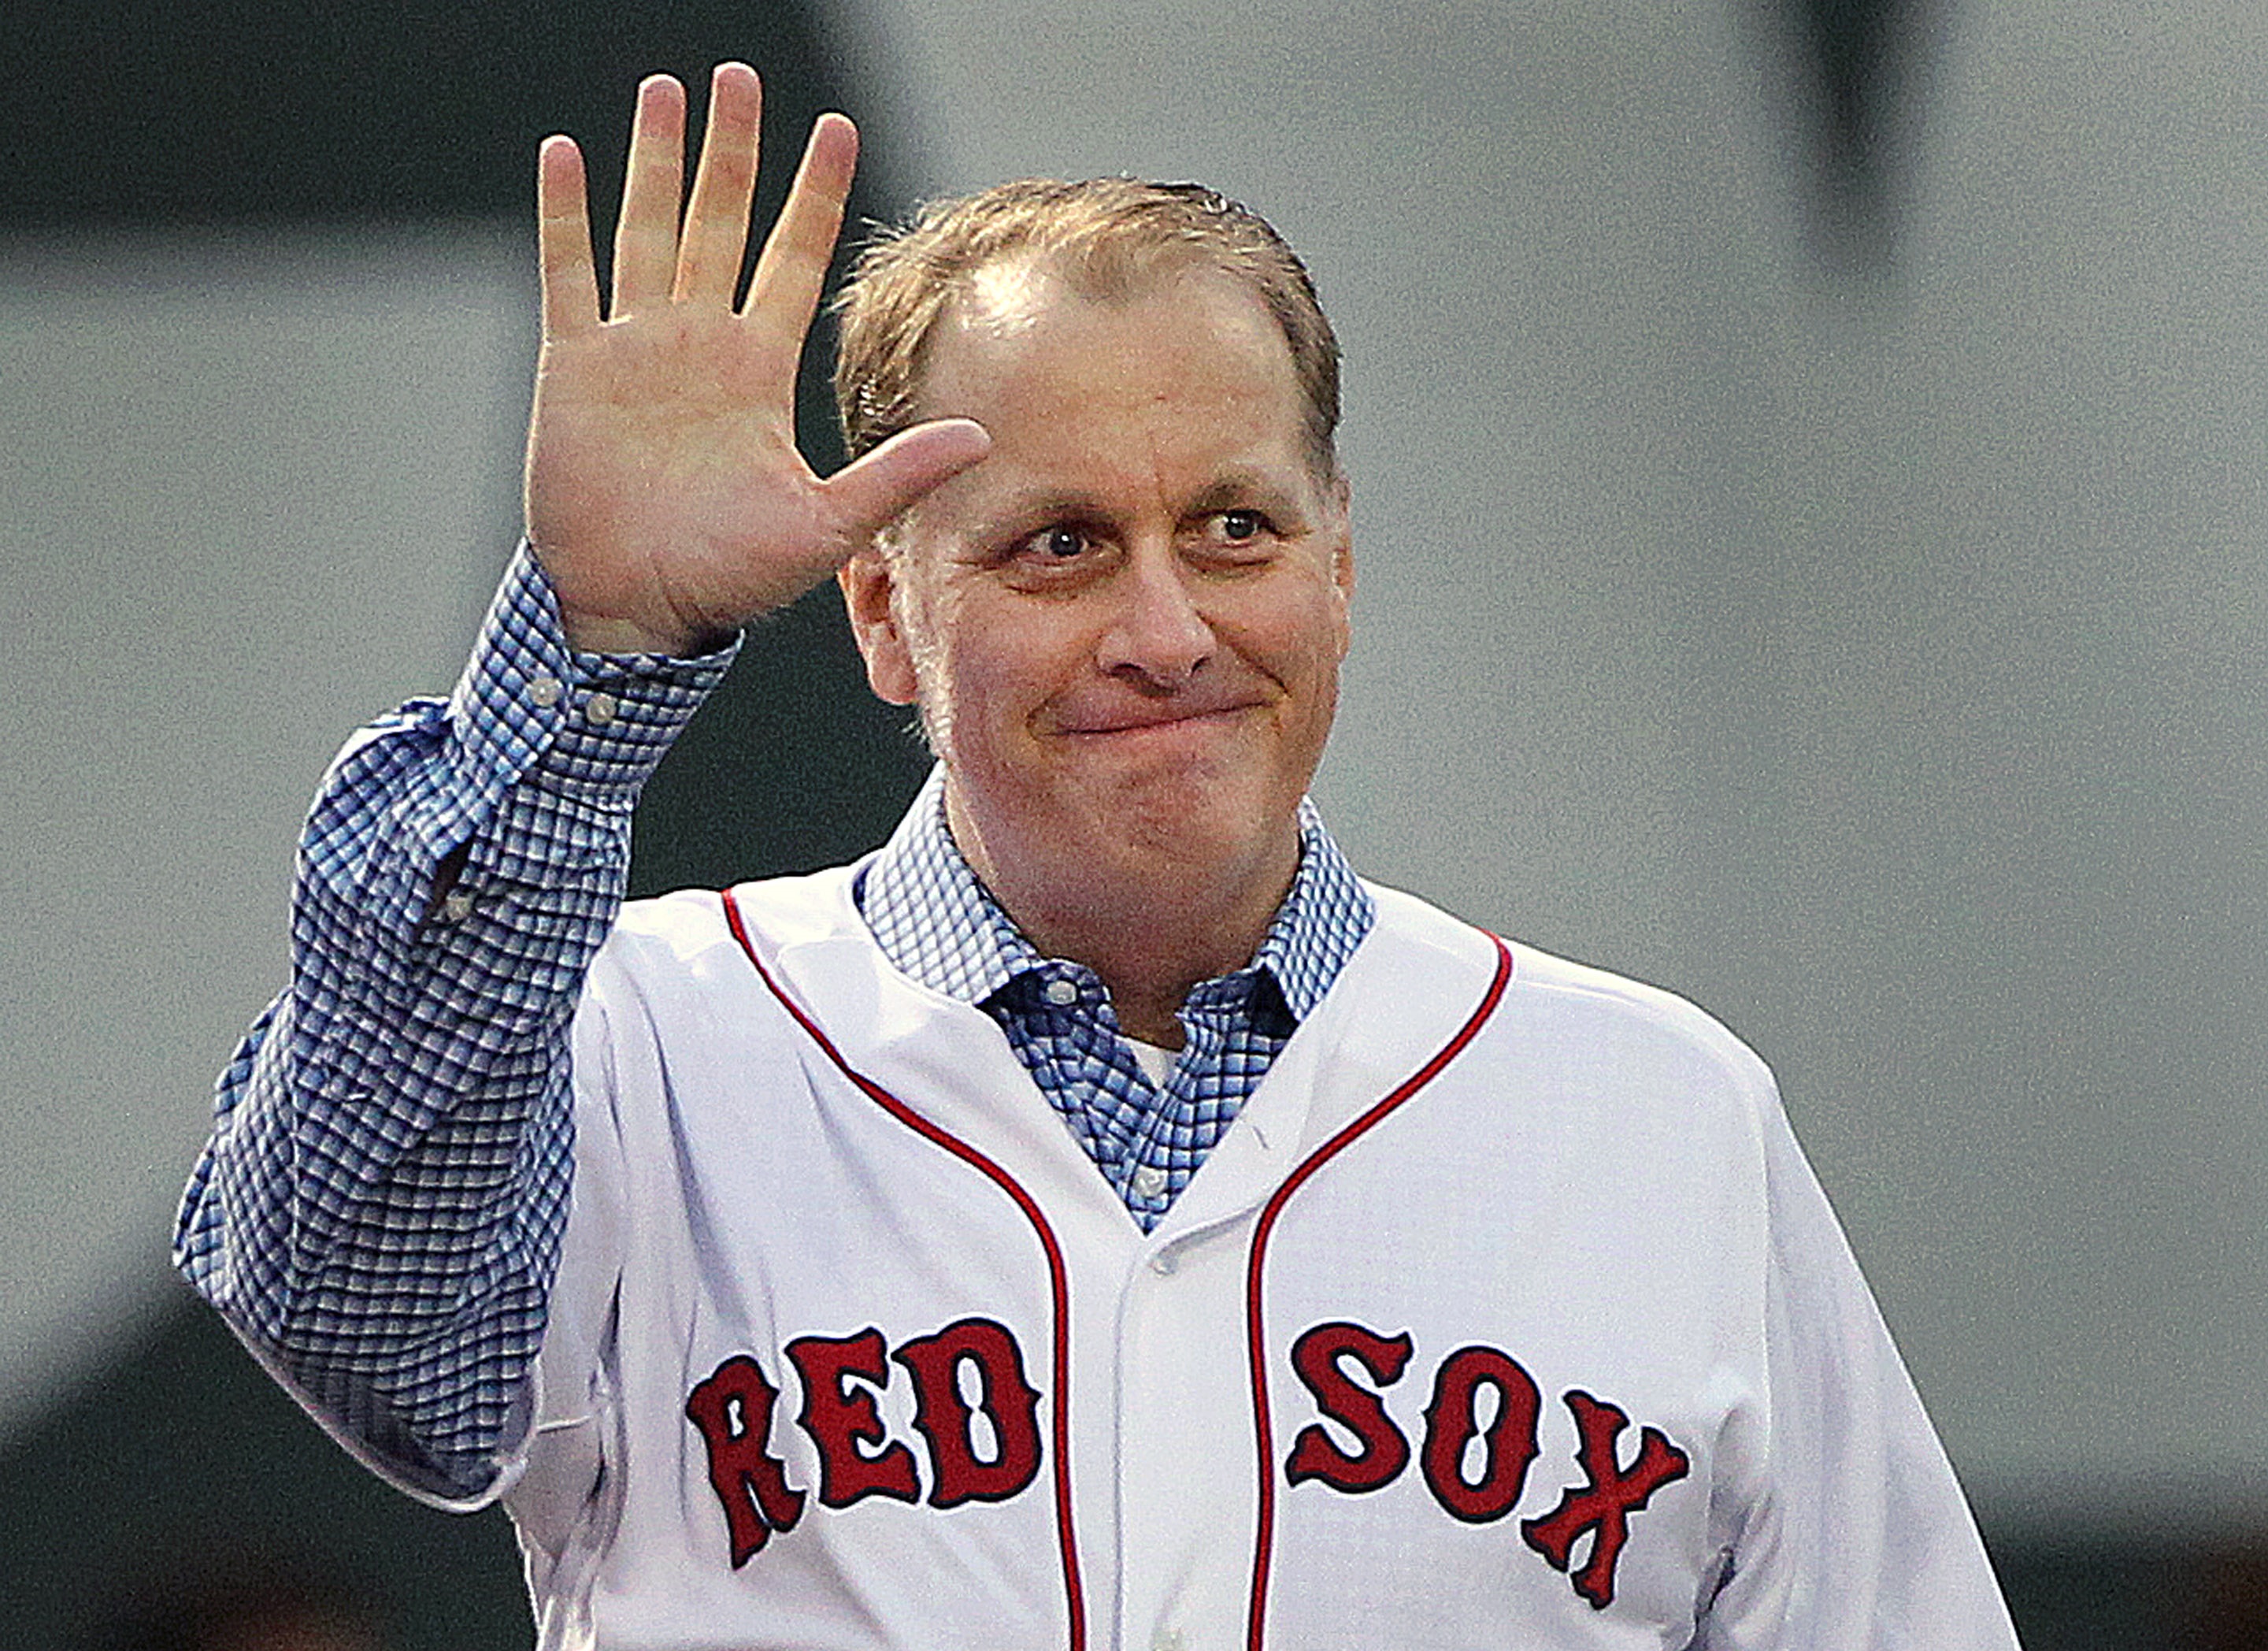 Former Boston Red Sox pitcher Curt Schilling is honored before a game between the Red Sox and the Atlanta Braves on May 28, 2014 in Boston.